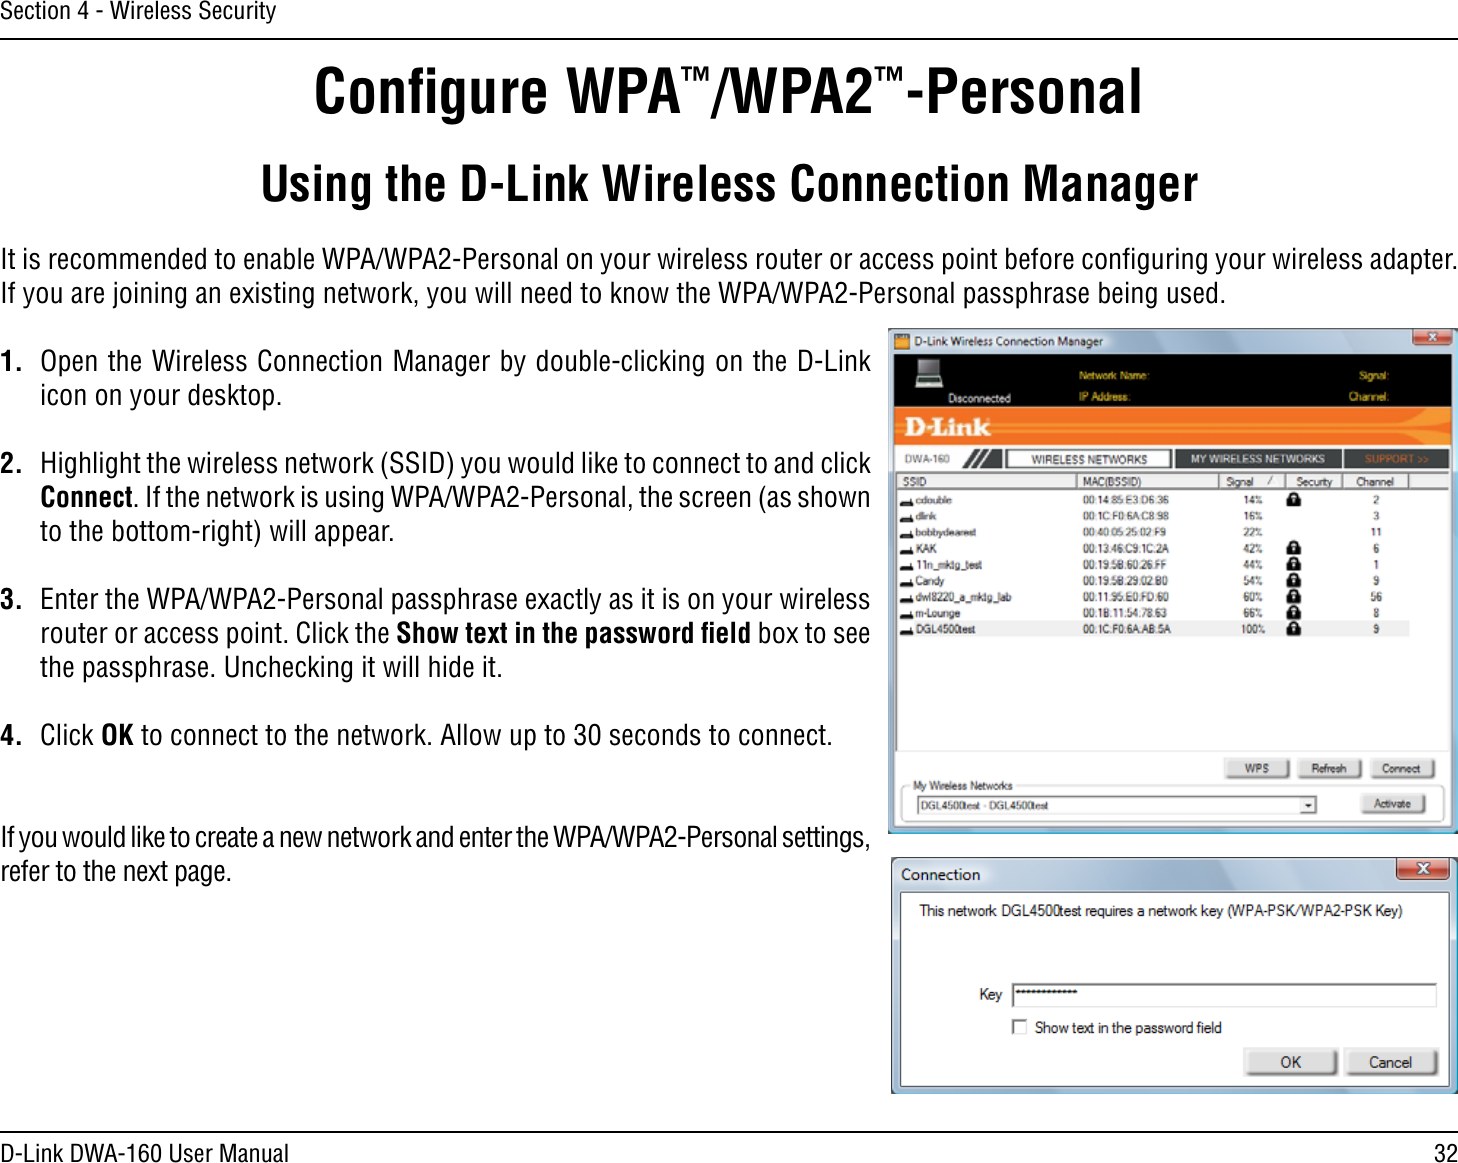 32D-Link DWA-160 User ManualSection 4 - Wireless SecurityConﬁgure WPA™/WPA2™-PersonalUsing the D-Link Wireless Connection ManagerIt is recommended to enable WPA/WPA2-Personal on your wireless router or access point before conﬁguring your wireless adapter. If you are joining an existing network, you will need to know the WPA/WPA2-Personal passphrase being used.1.  Open the Wireless Connection Manager by double-clicking on the D-Link icon on your desktop. 2.  Highlight the wireless network (SSID) you would like to connect to and click Connect. If the network is using WPA/WPA2-Personal, the screen (as shown to the bottom-right) will appear. 3.  Enter the WPA/WPA2-Personal passphrase exactly as it is on your wireless router or access point. Click the Show text in the password ﬁeld box to see the passphrase. Unchecking it will hide it.4. Click OK to connect to the network. Allow up to 30 seconds to connect.If you would like to create a new network and enter the WPA/WPA2-Personal settings, refer to the next page.